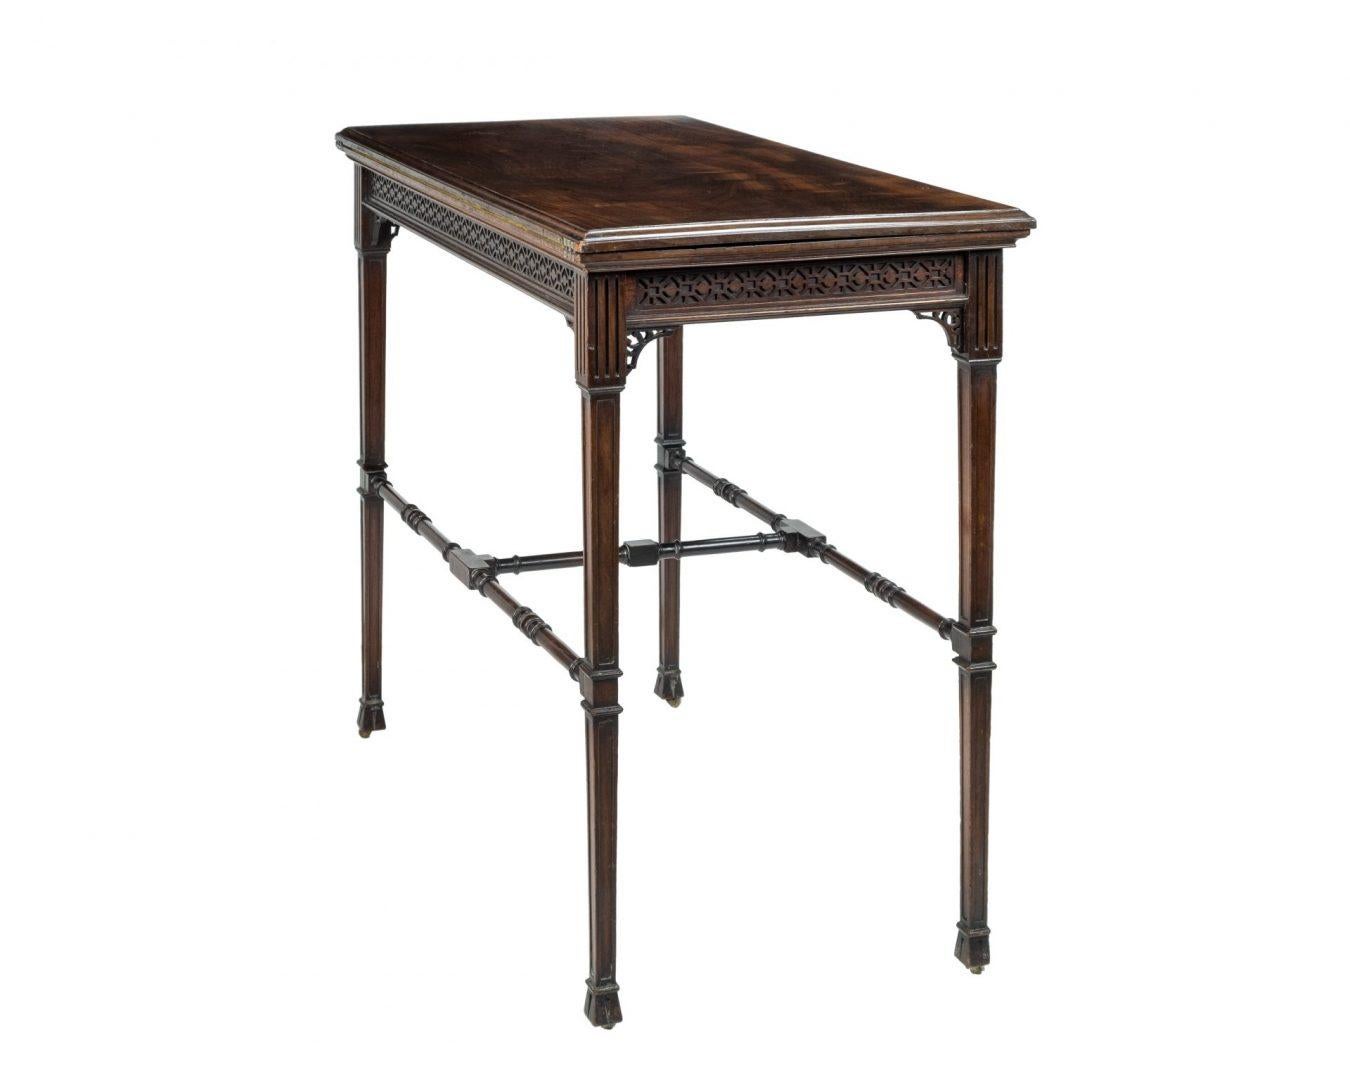 British Late 19th-Early 20th Century Gillow & Co. Card Table